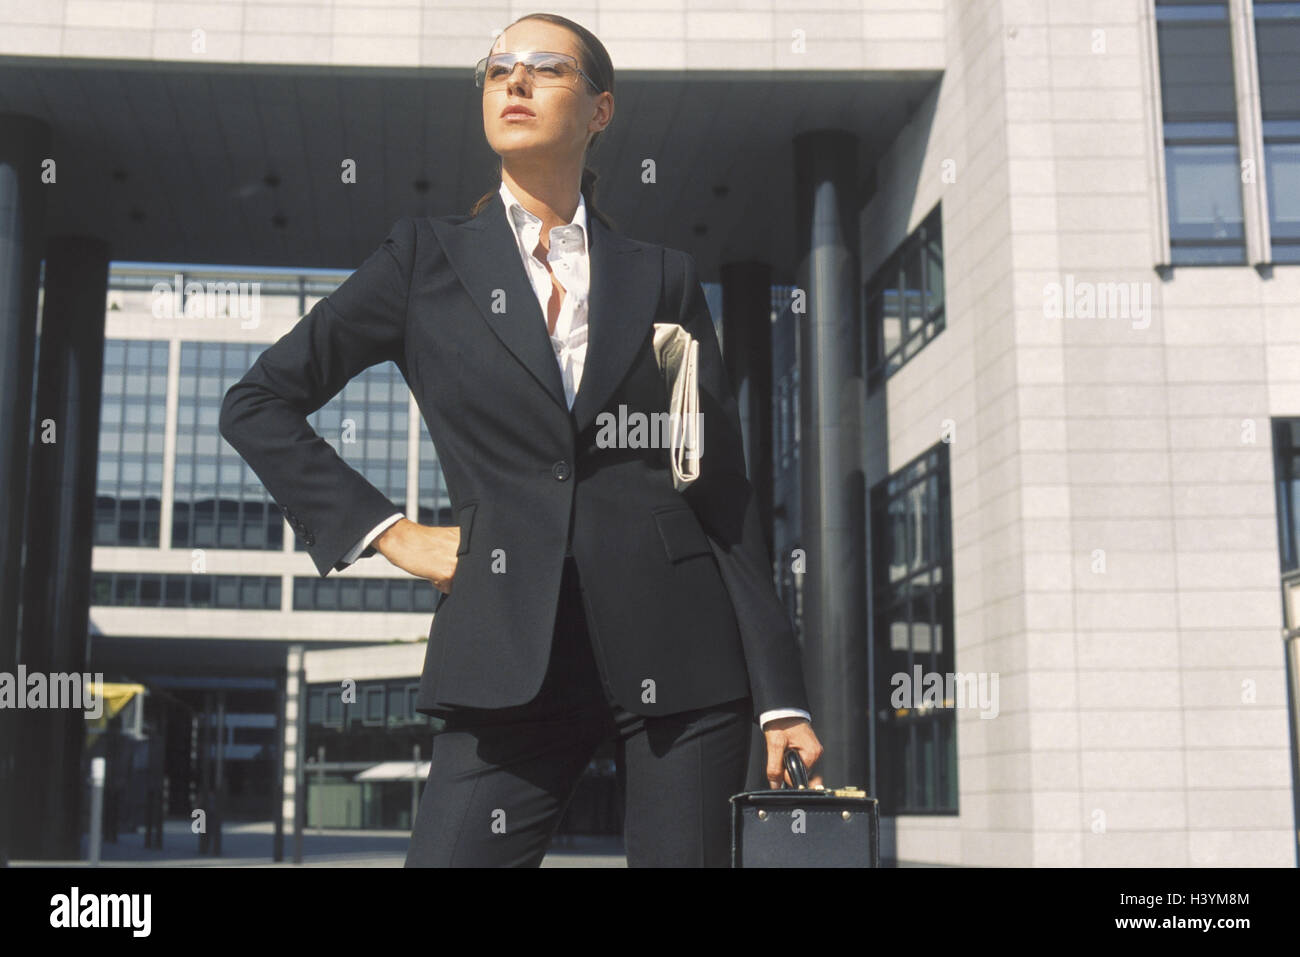 Businesswoman, challenging, half portrait, office buildings, occupation, business, woman, suit, career woman, manager, glasses, stand, decided, stand self-confidently, dominant, ambitiously, energetically, energetically, seriously, briefcase, briefcase, n Stock Photo